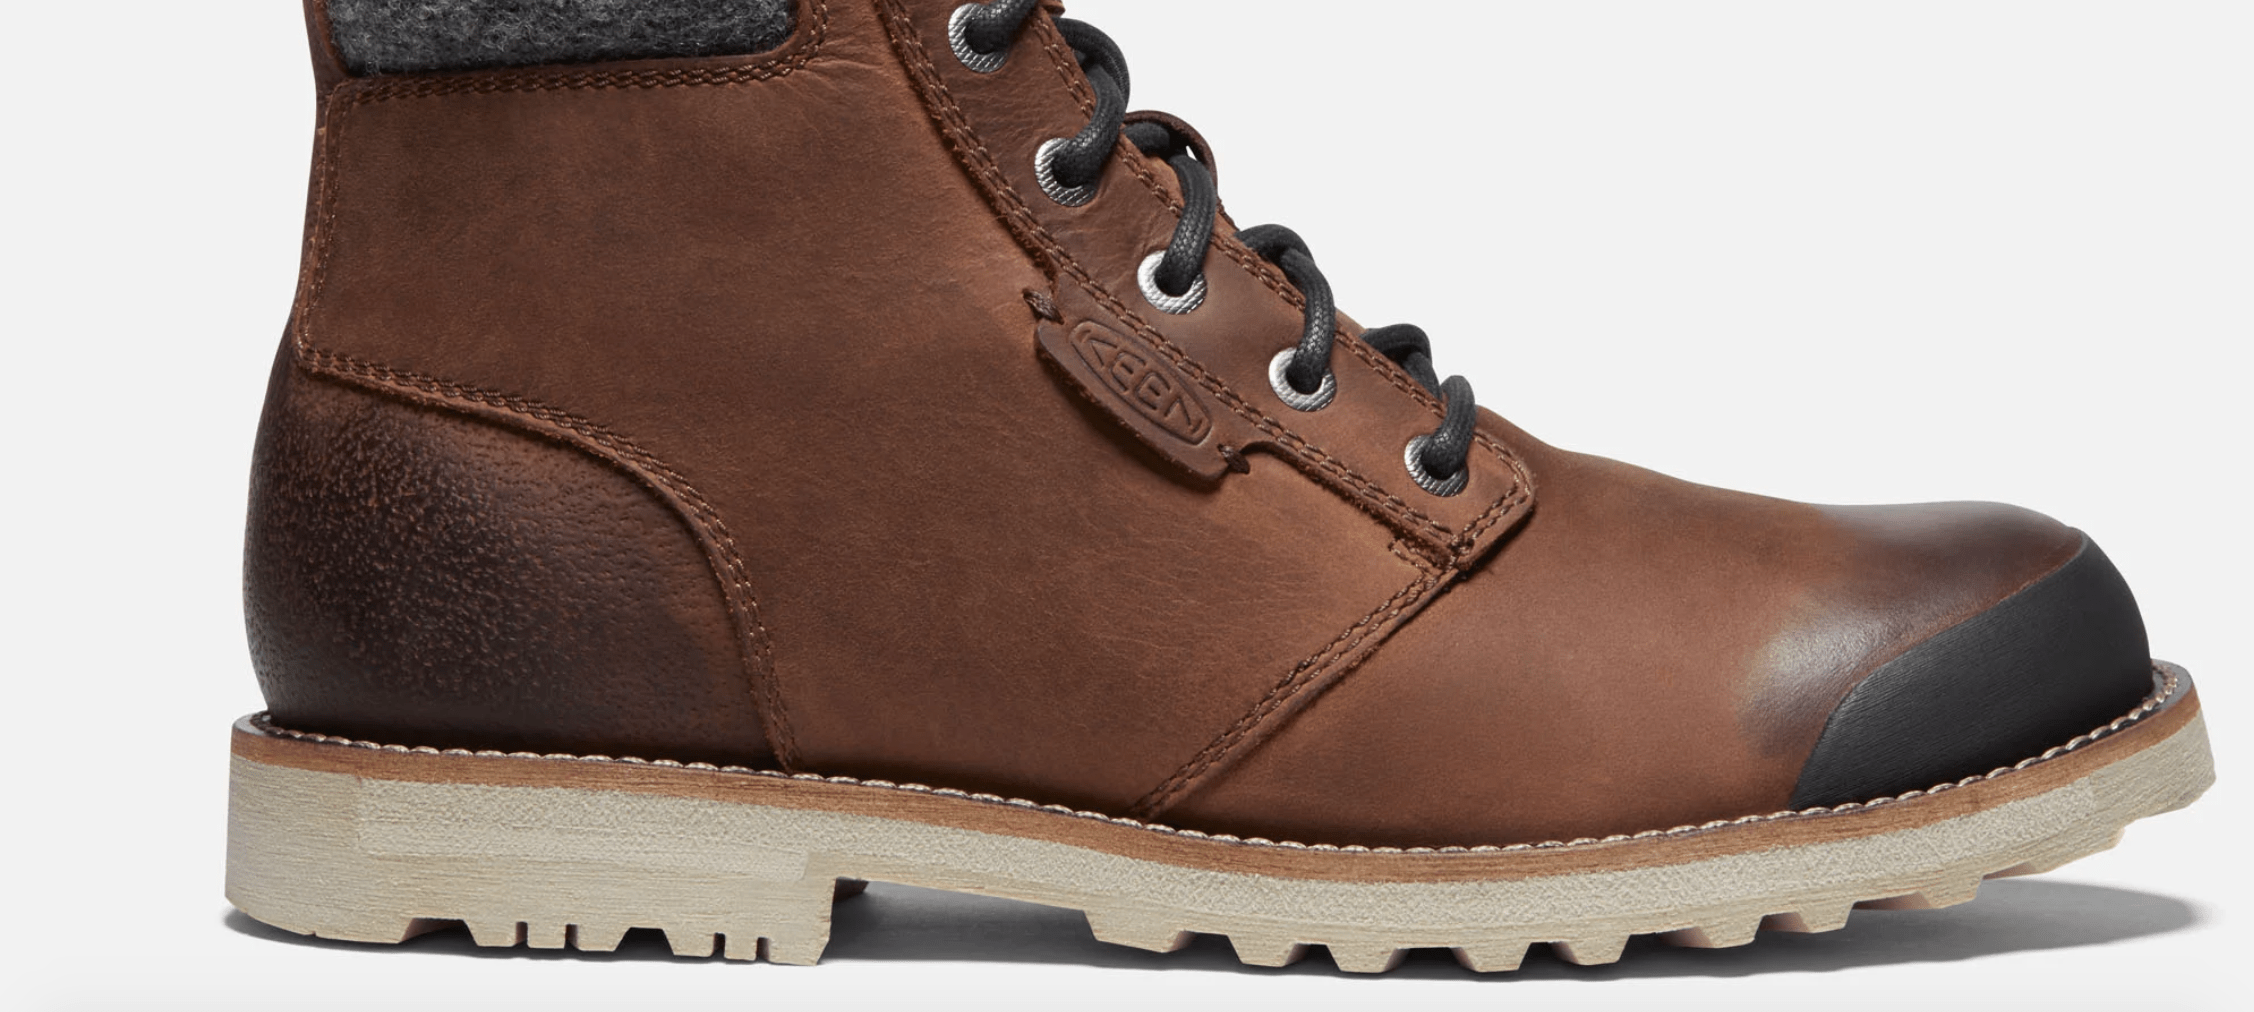 Keen Shoes Keen The Slater II Casual Boots